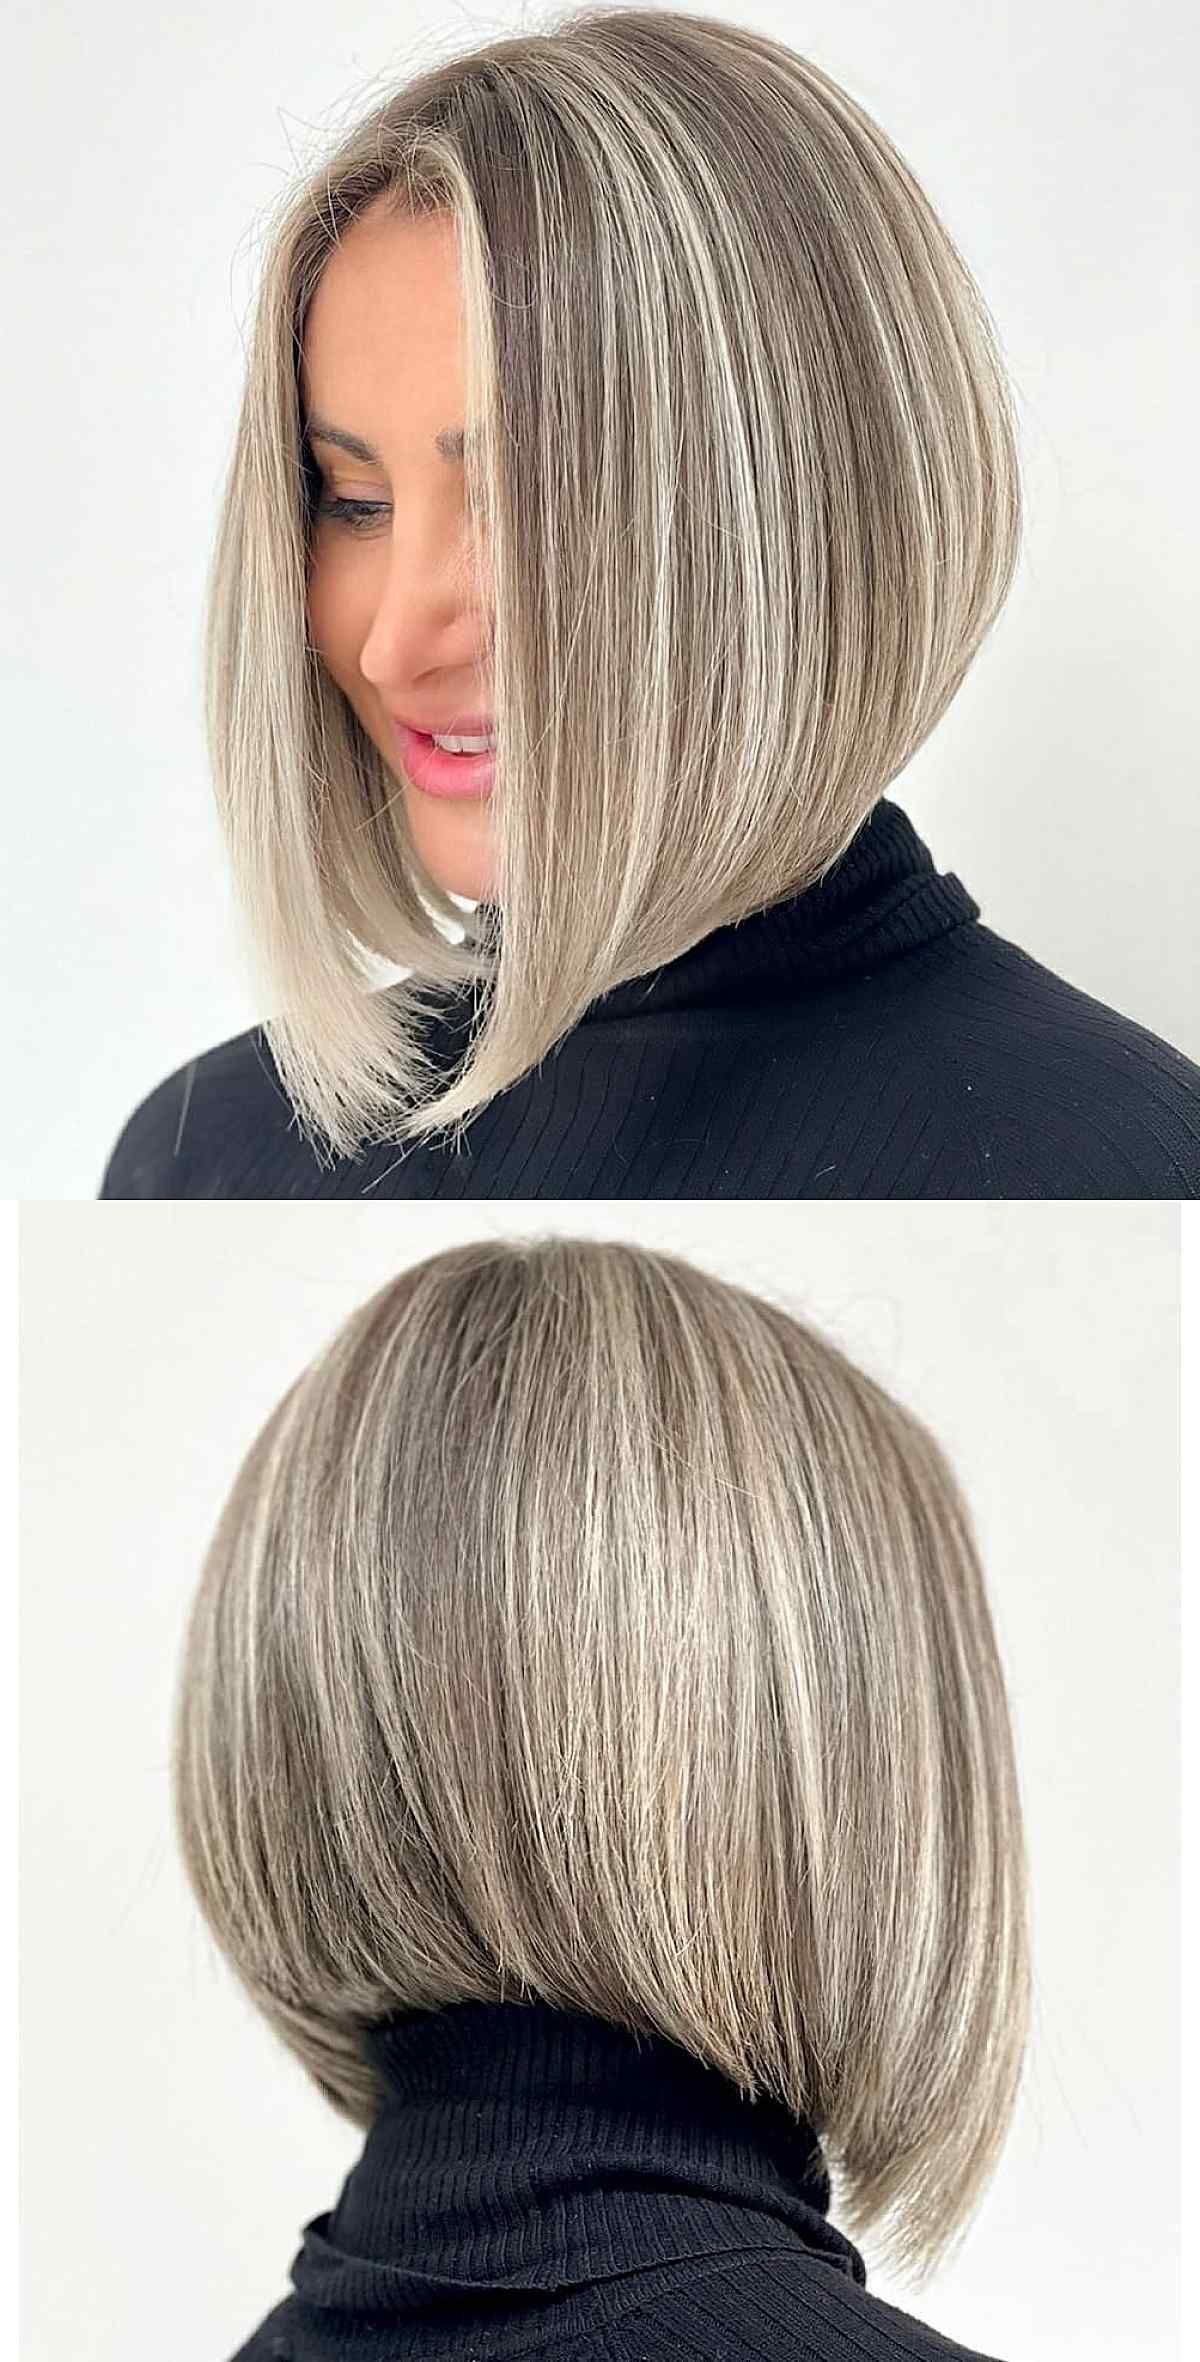 34 Hottest A Line Bob Haircuts You'll Want To Try In 2022 Pertaining To A Line Bob Hairstyles With An Undercut (View 25 of 25)